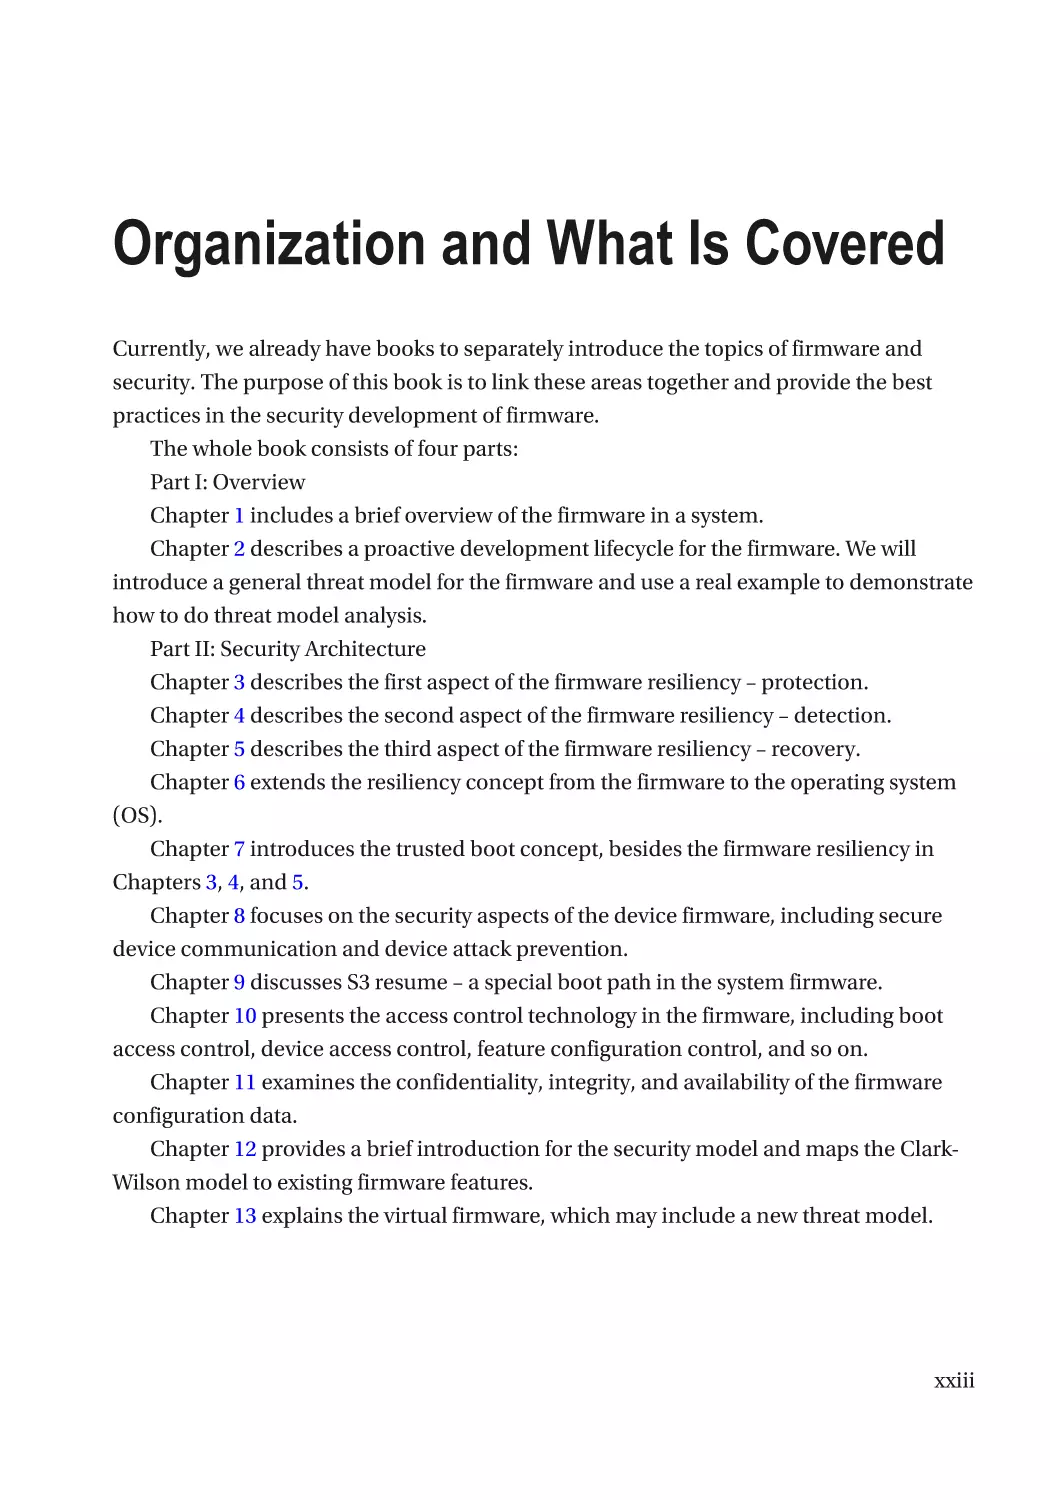 Organization and What Is Covered